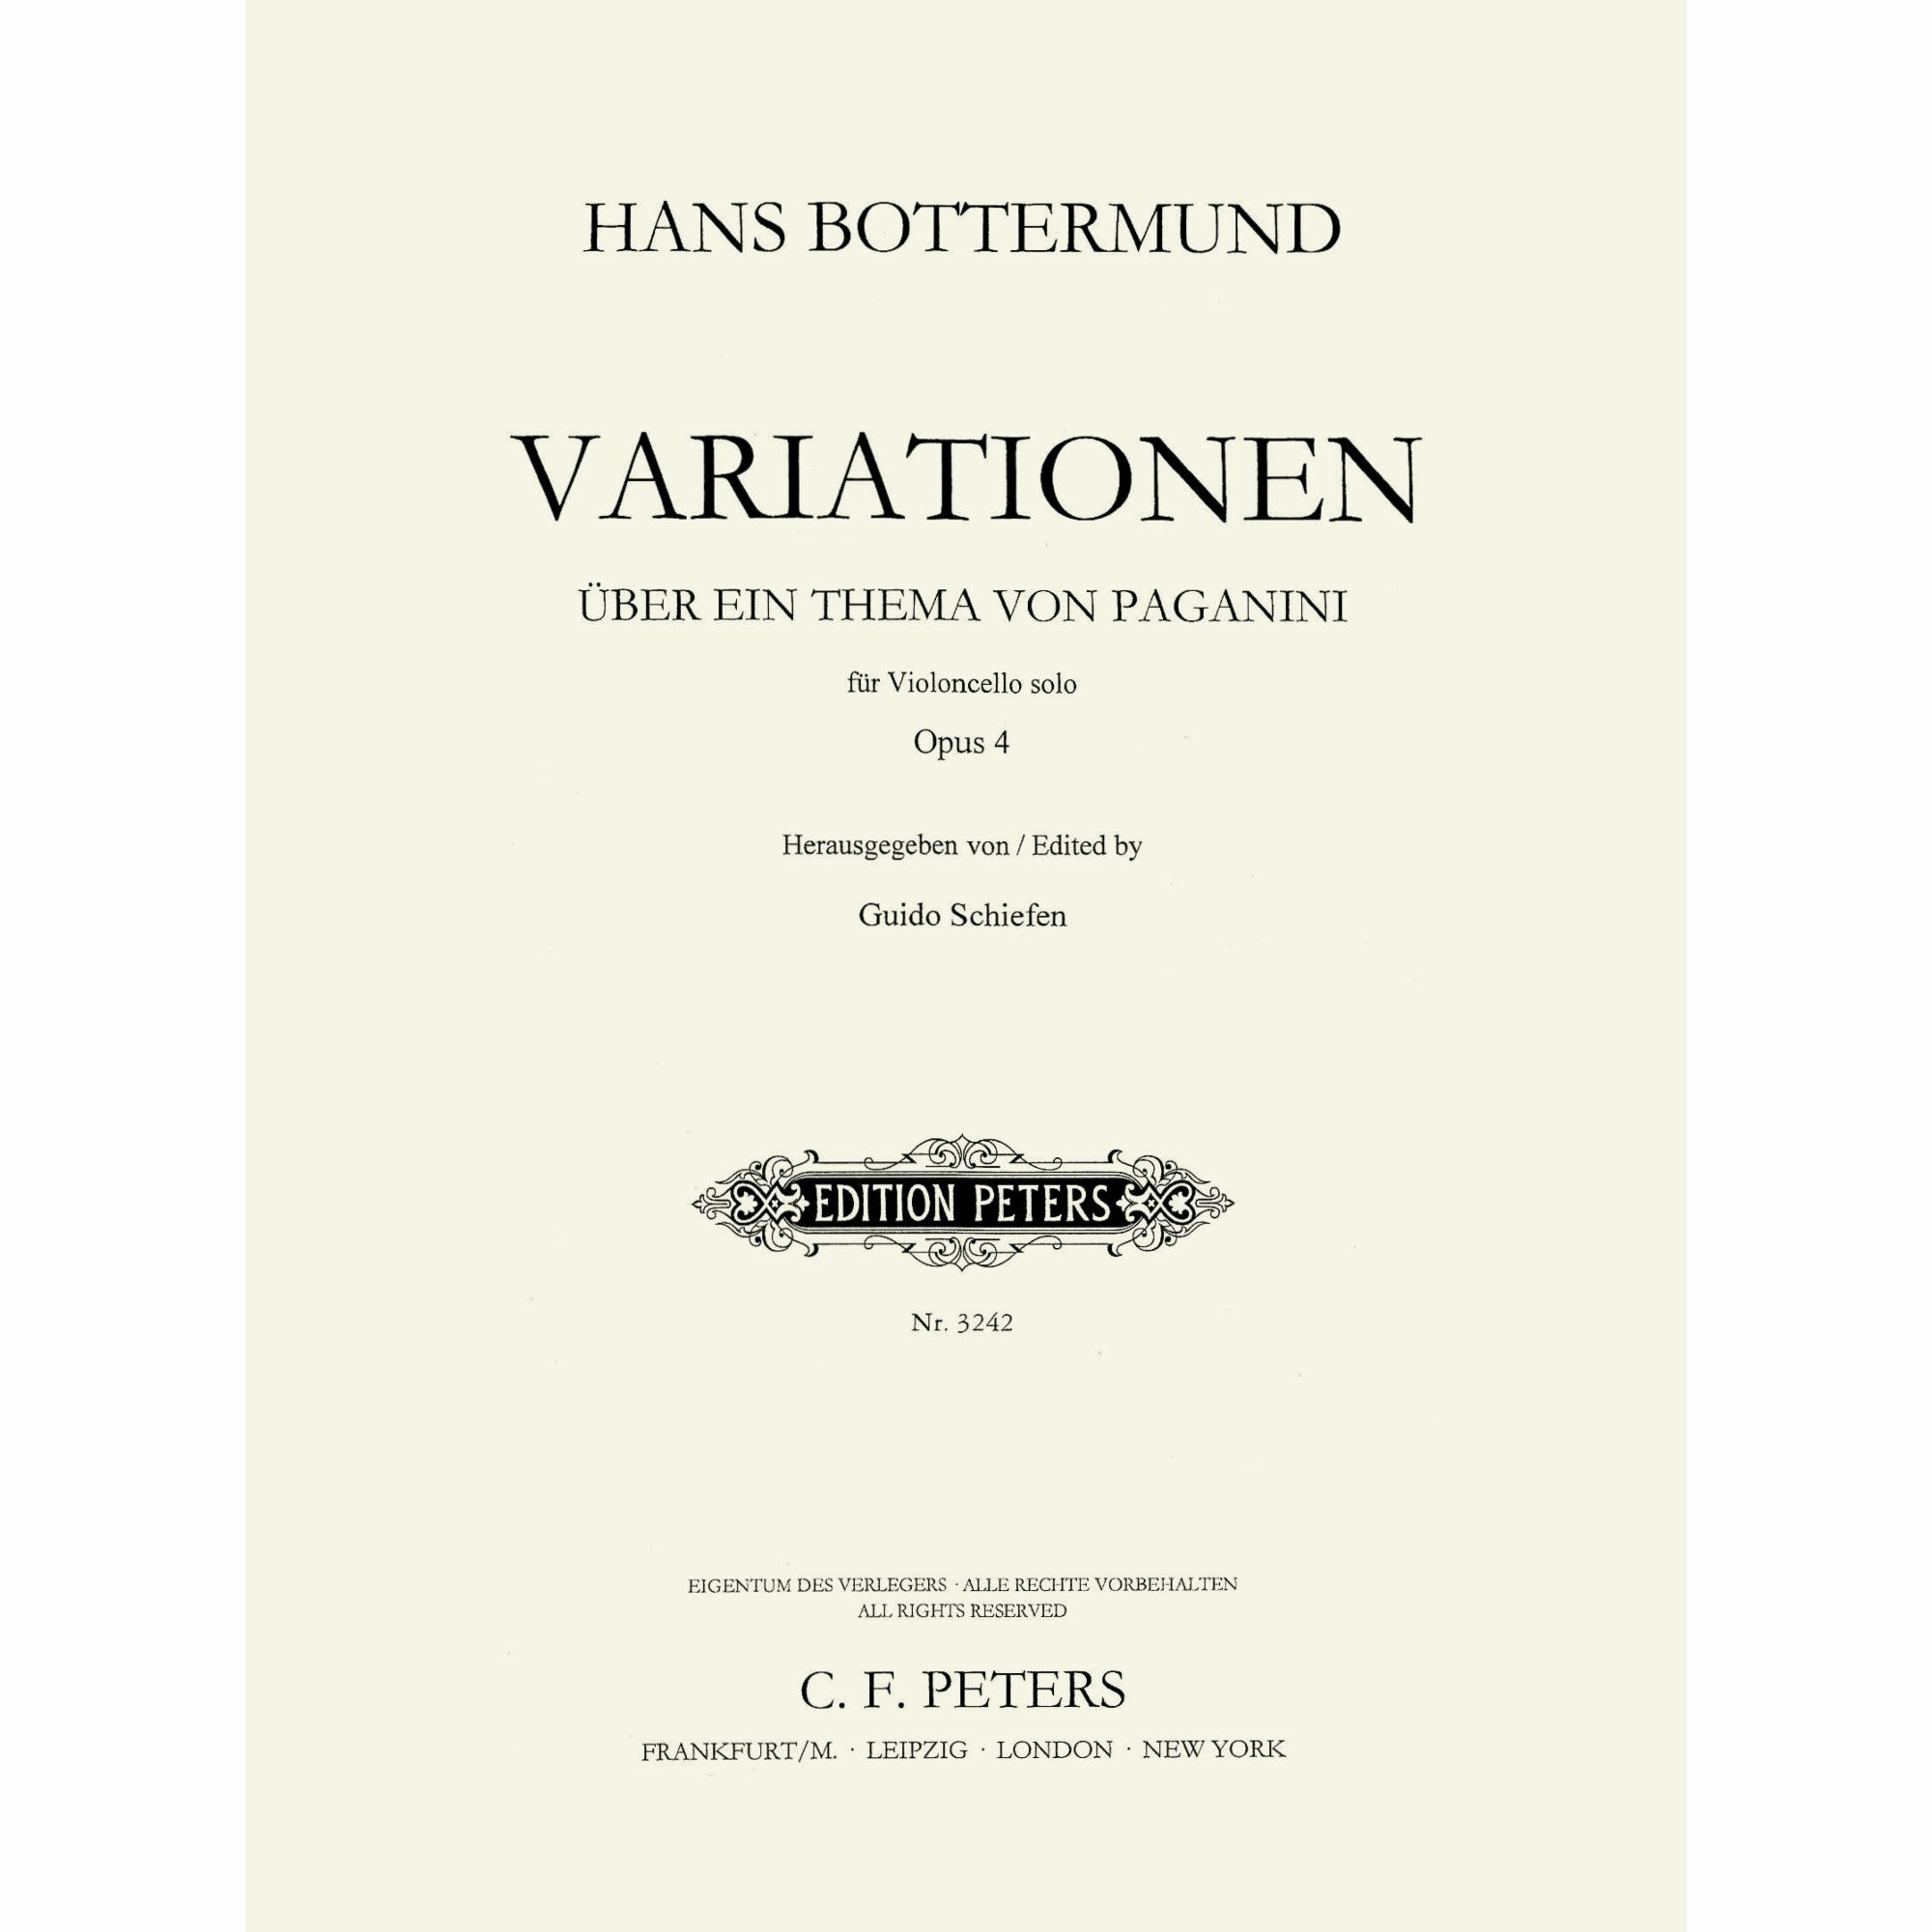 Bottermund -- Variations on a Theme by Paganini, Op. 4 for Solo Cello